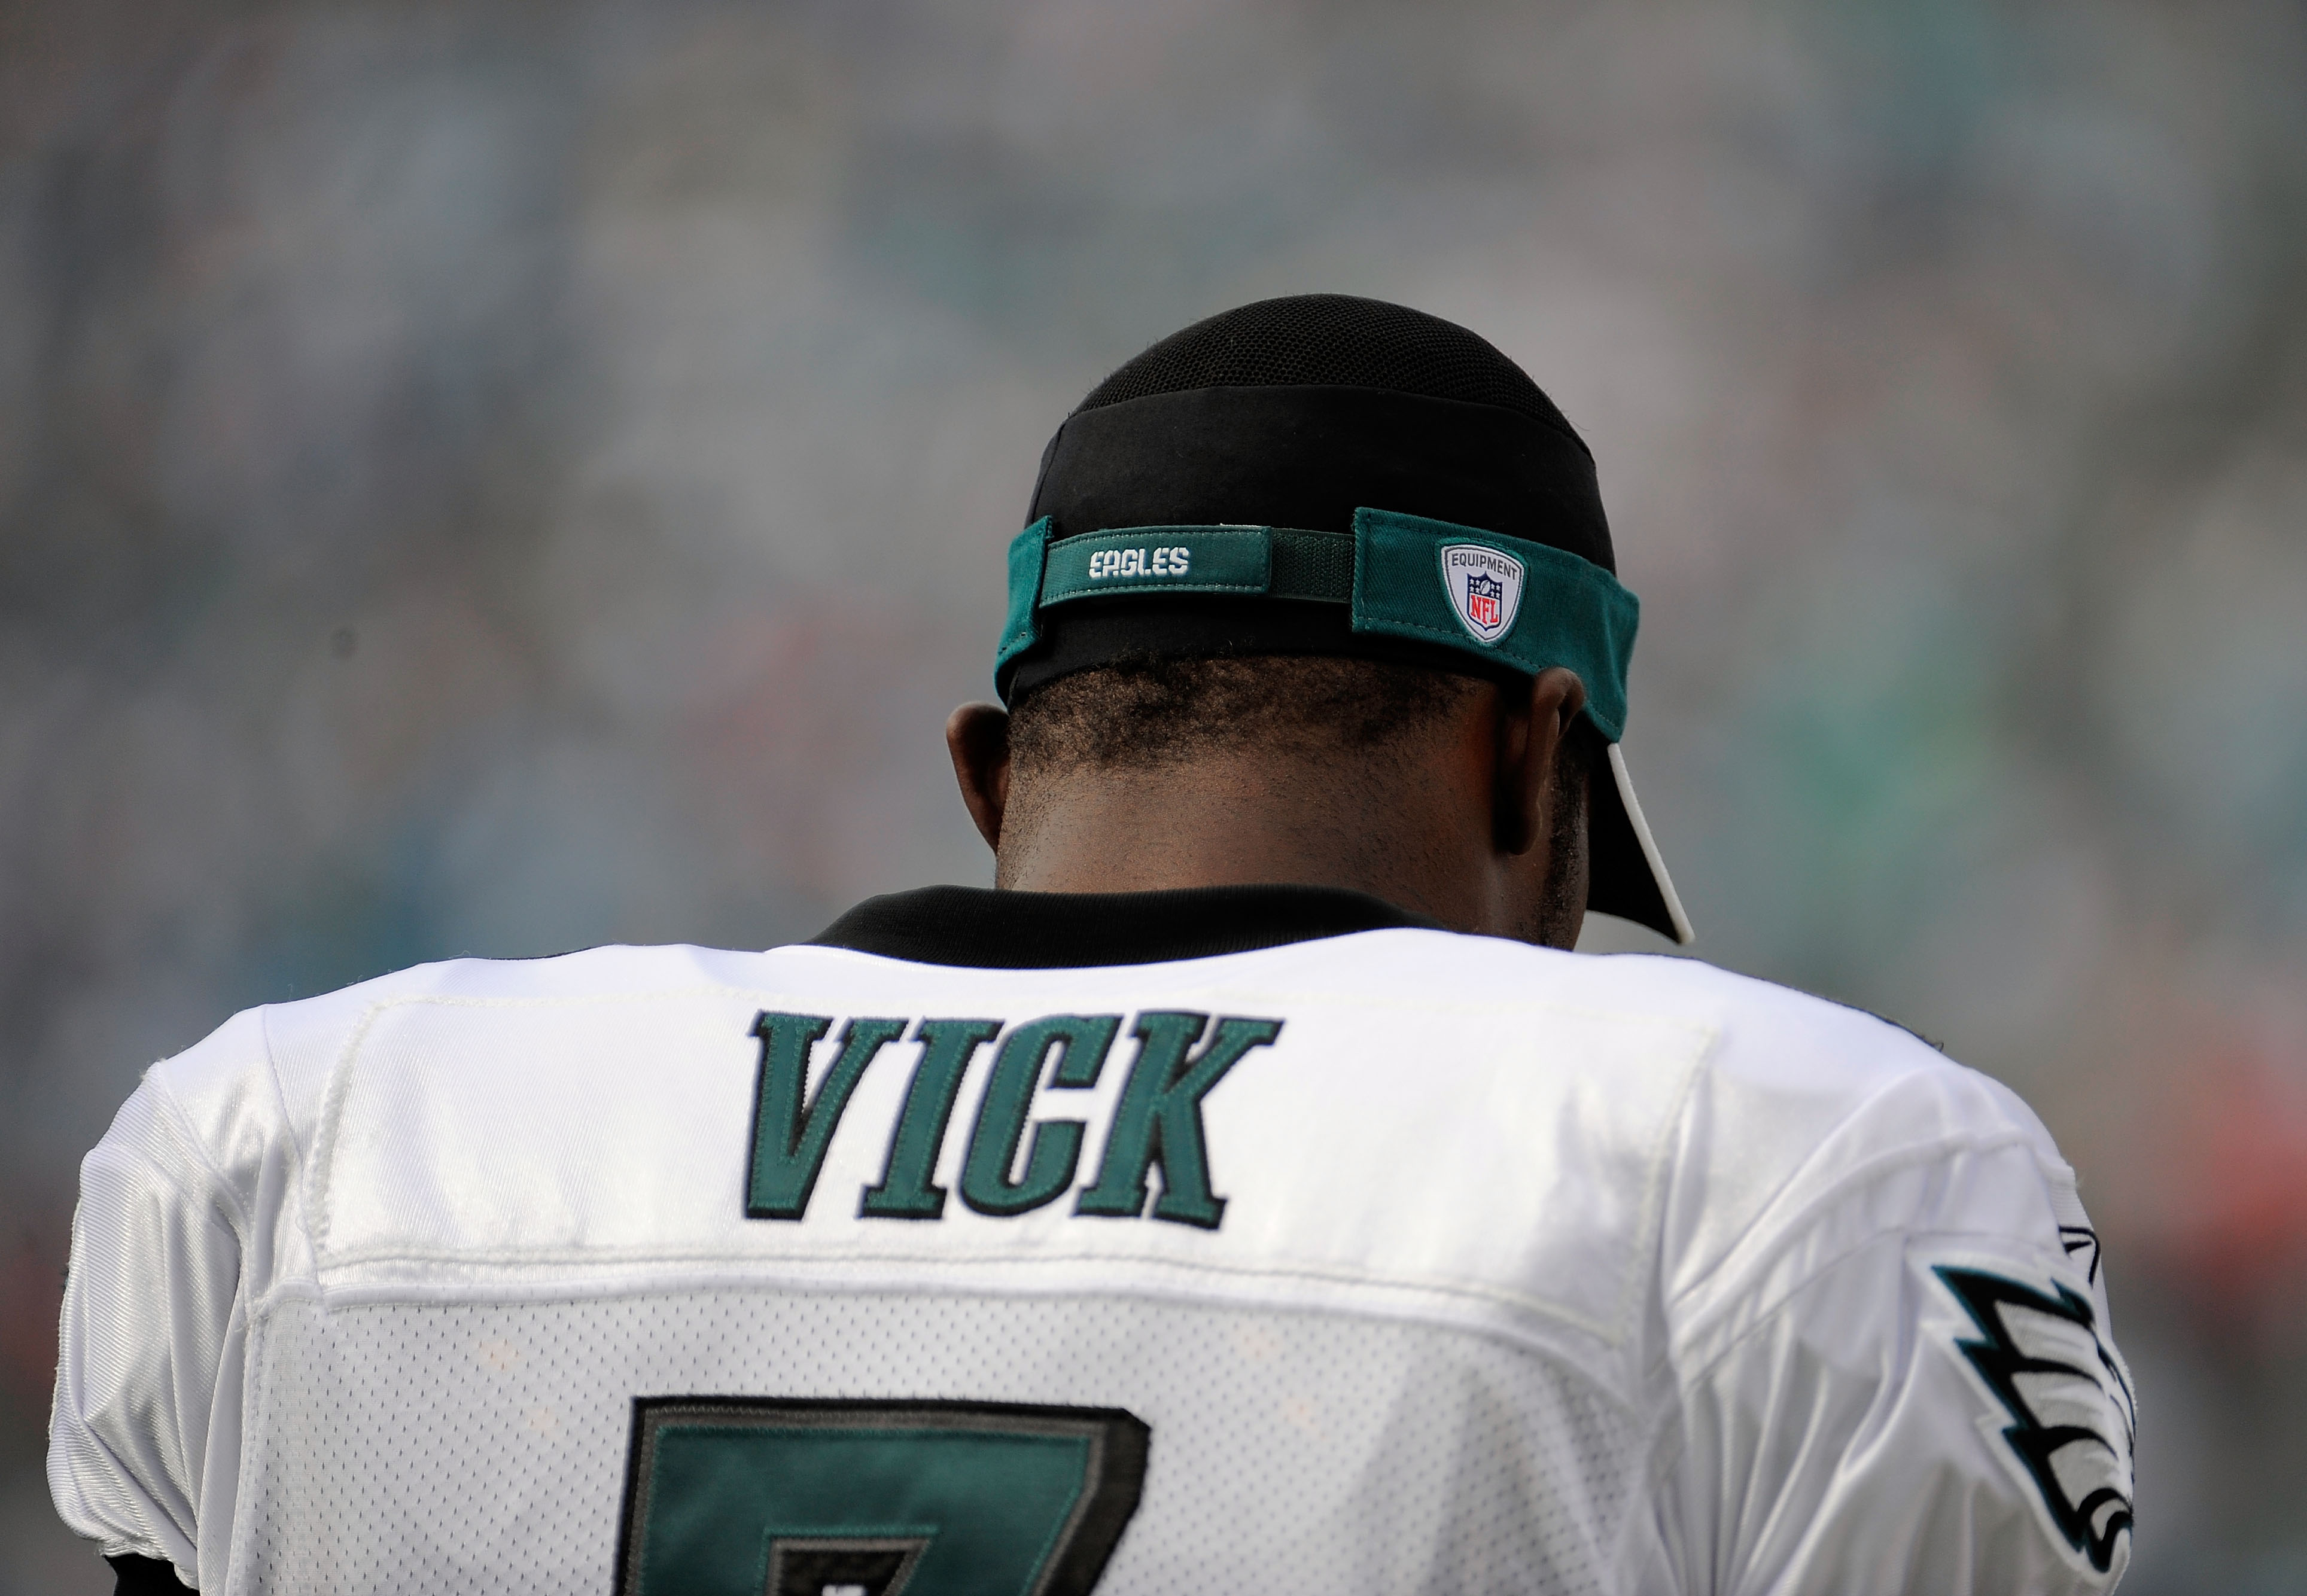 Michael Vick: Ranking the top 7 performances of the star QBs NFL career